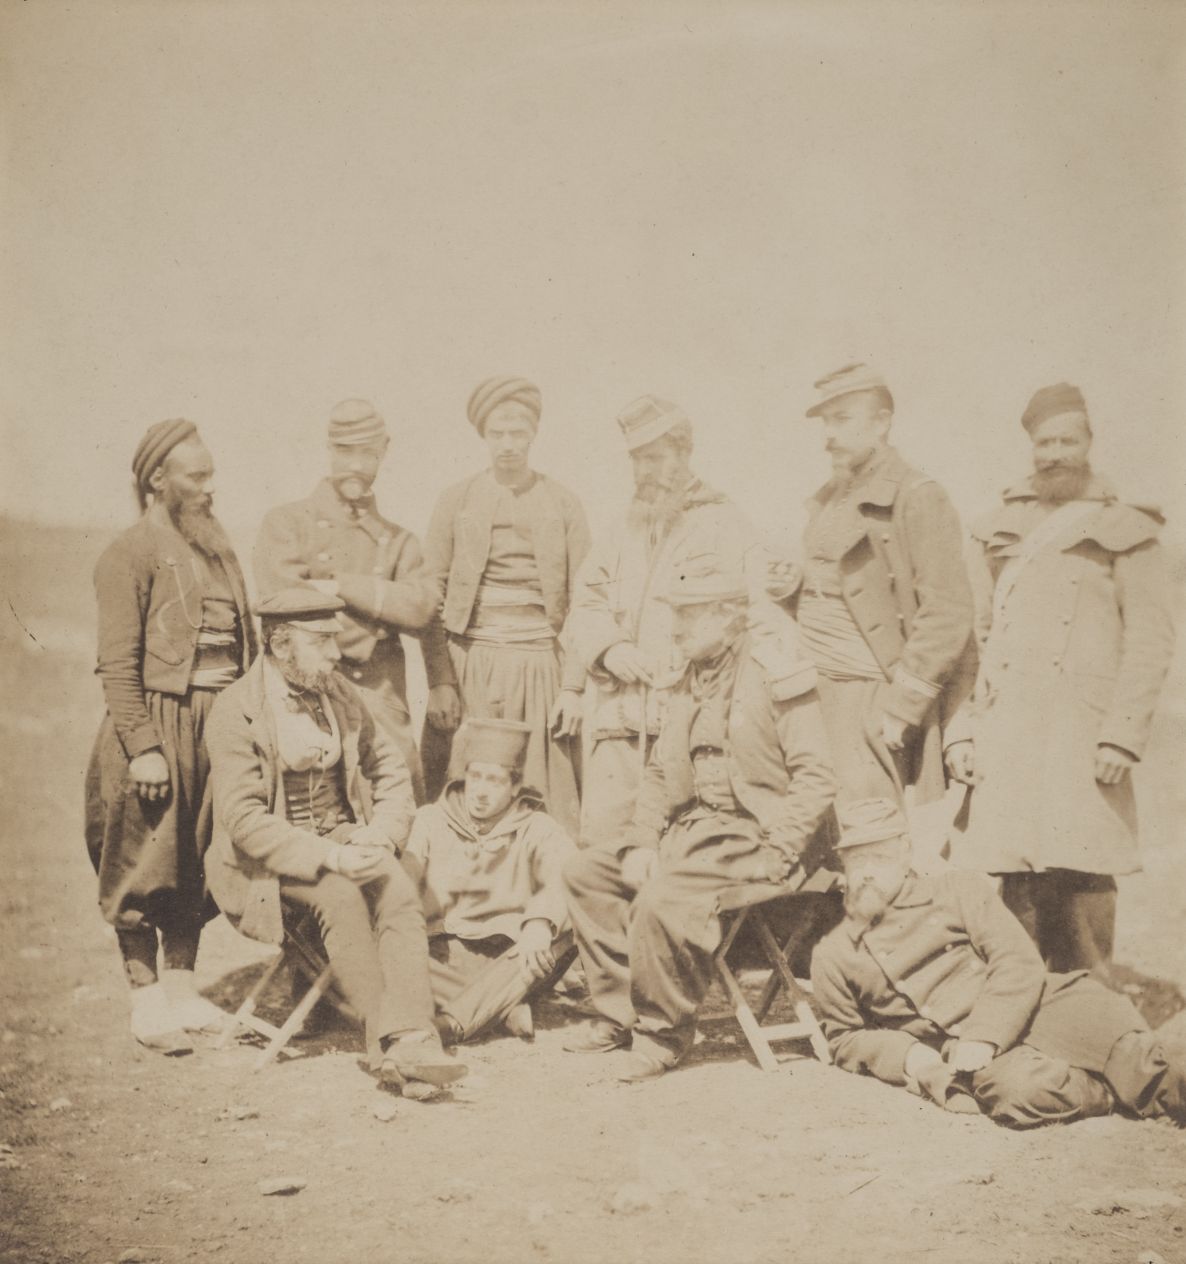 *Fenton (Roger, 1819-1869). General Ciss‚ & Officers & Soldiers of General Bosquet's Division, 1856,